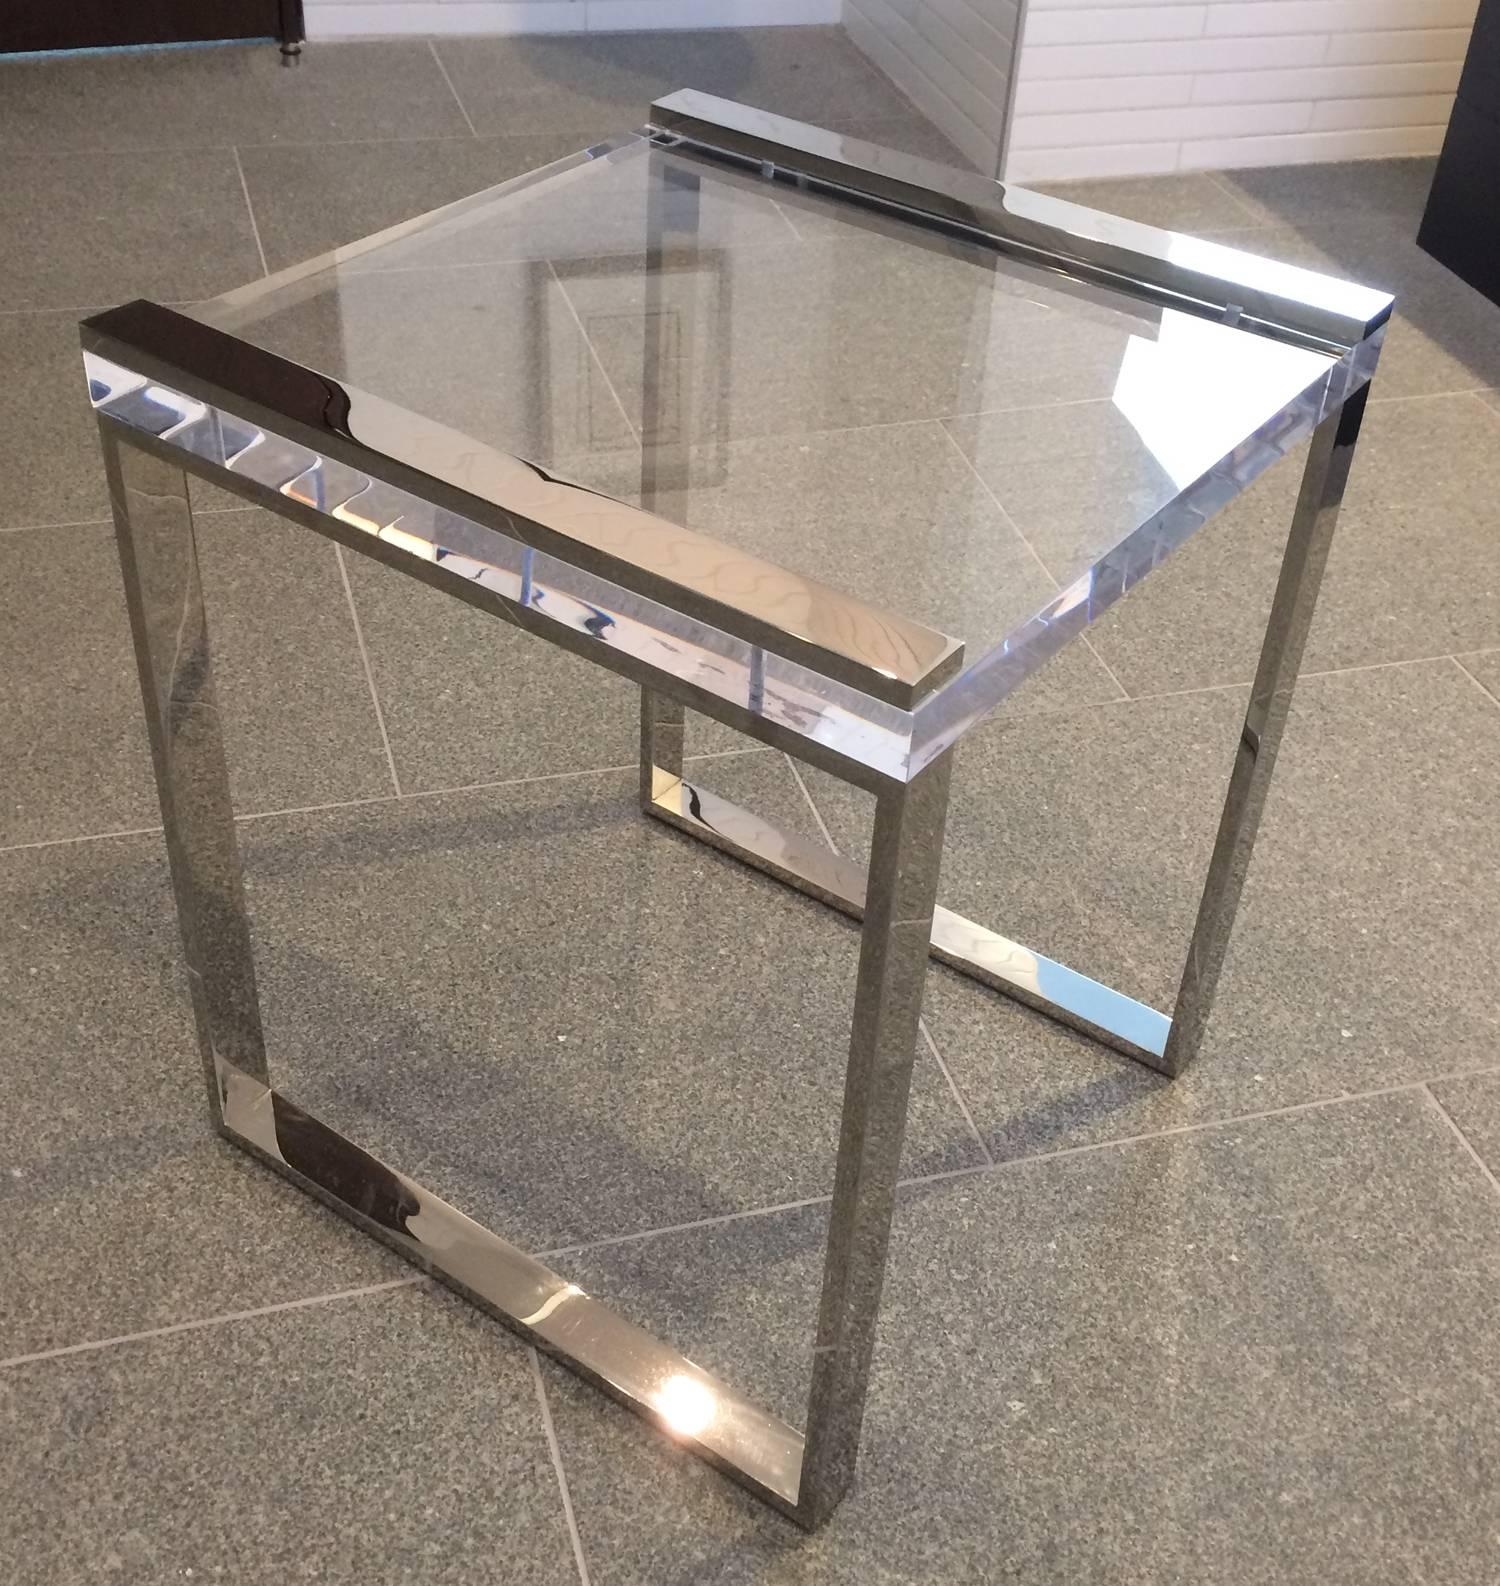 Stunning pair of Lucite and polished nickel side or end tables designed and manufactured by Charles Hollis Jones as part of his 